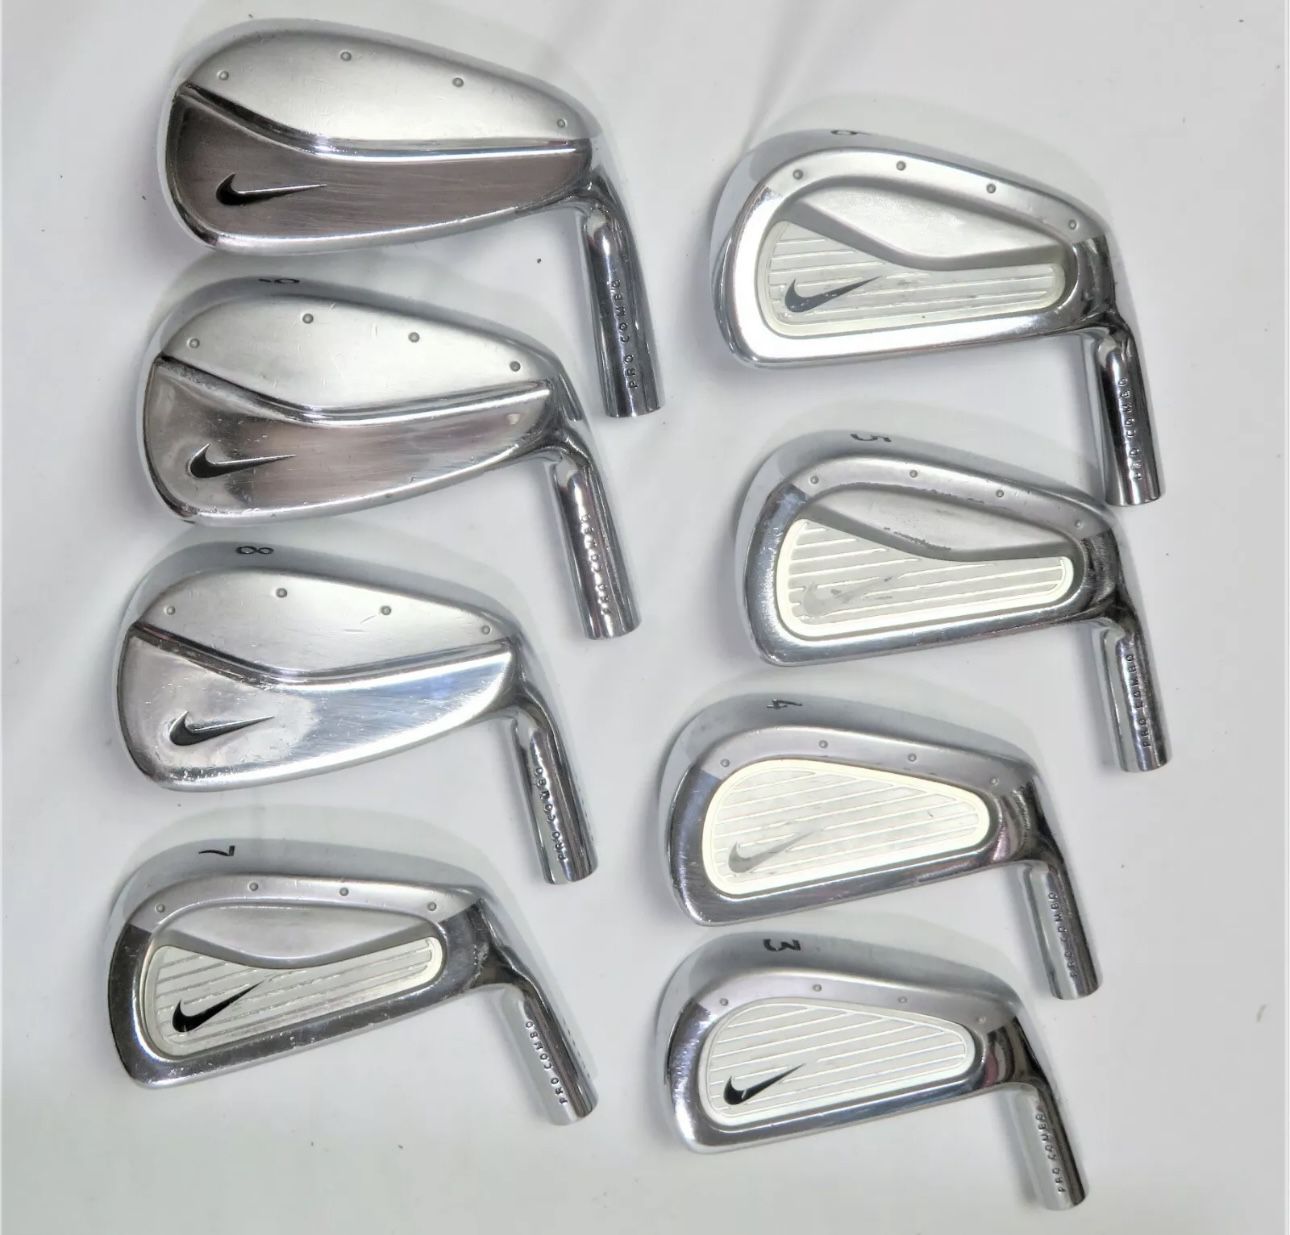 Nike Pro Combo Golf Head Set Of 8 Forged Japan Excellent Condition Just Like New